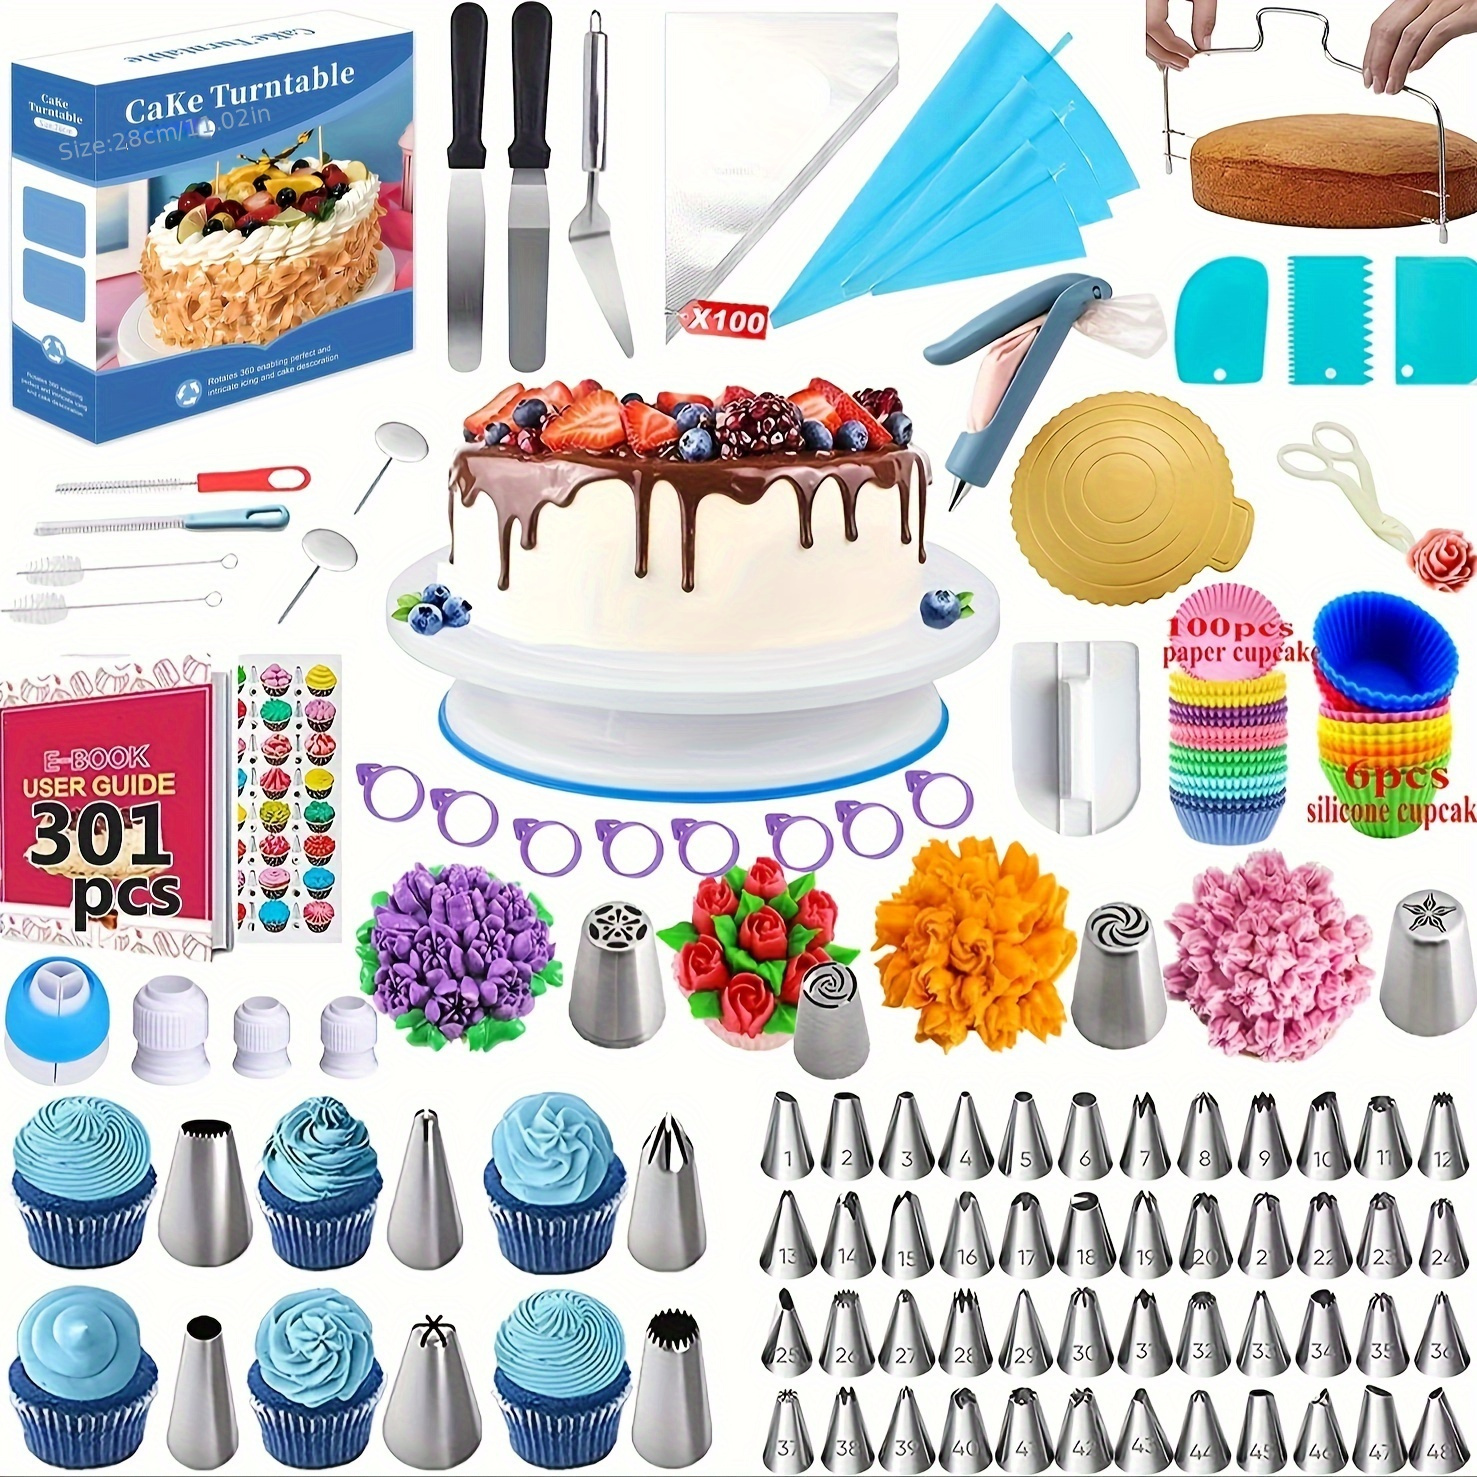 106 Pcs Cake Decorating Kit, Cake Decorating Supplies Tools for Beginners,Kids and Cake lovers, Brithday Cake Cookies Pastry Tools, with Cake